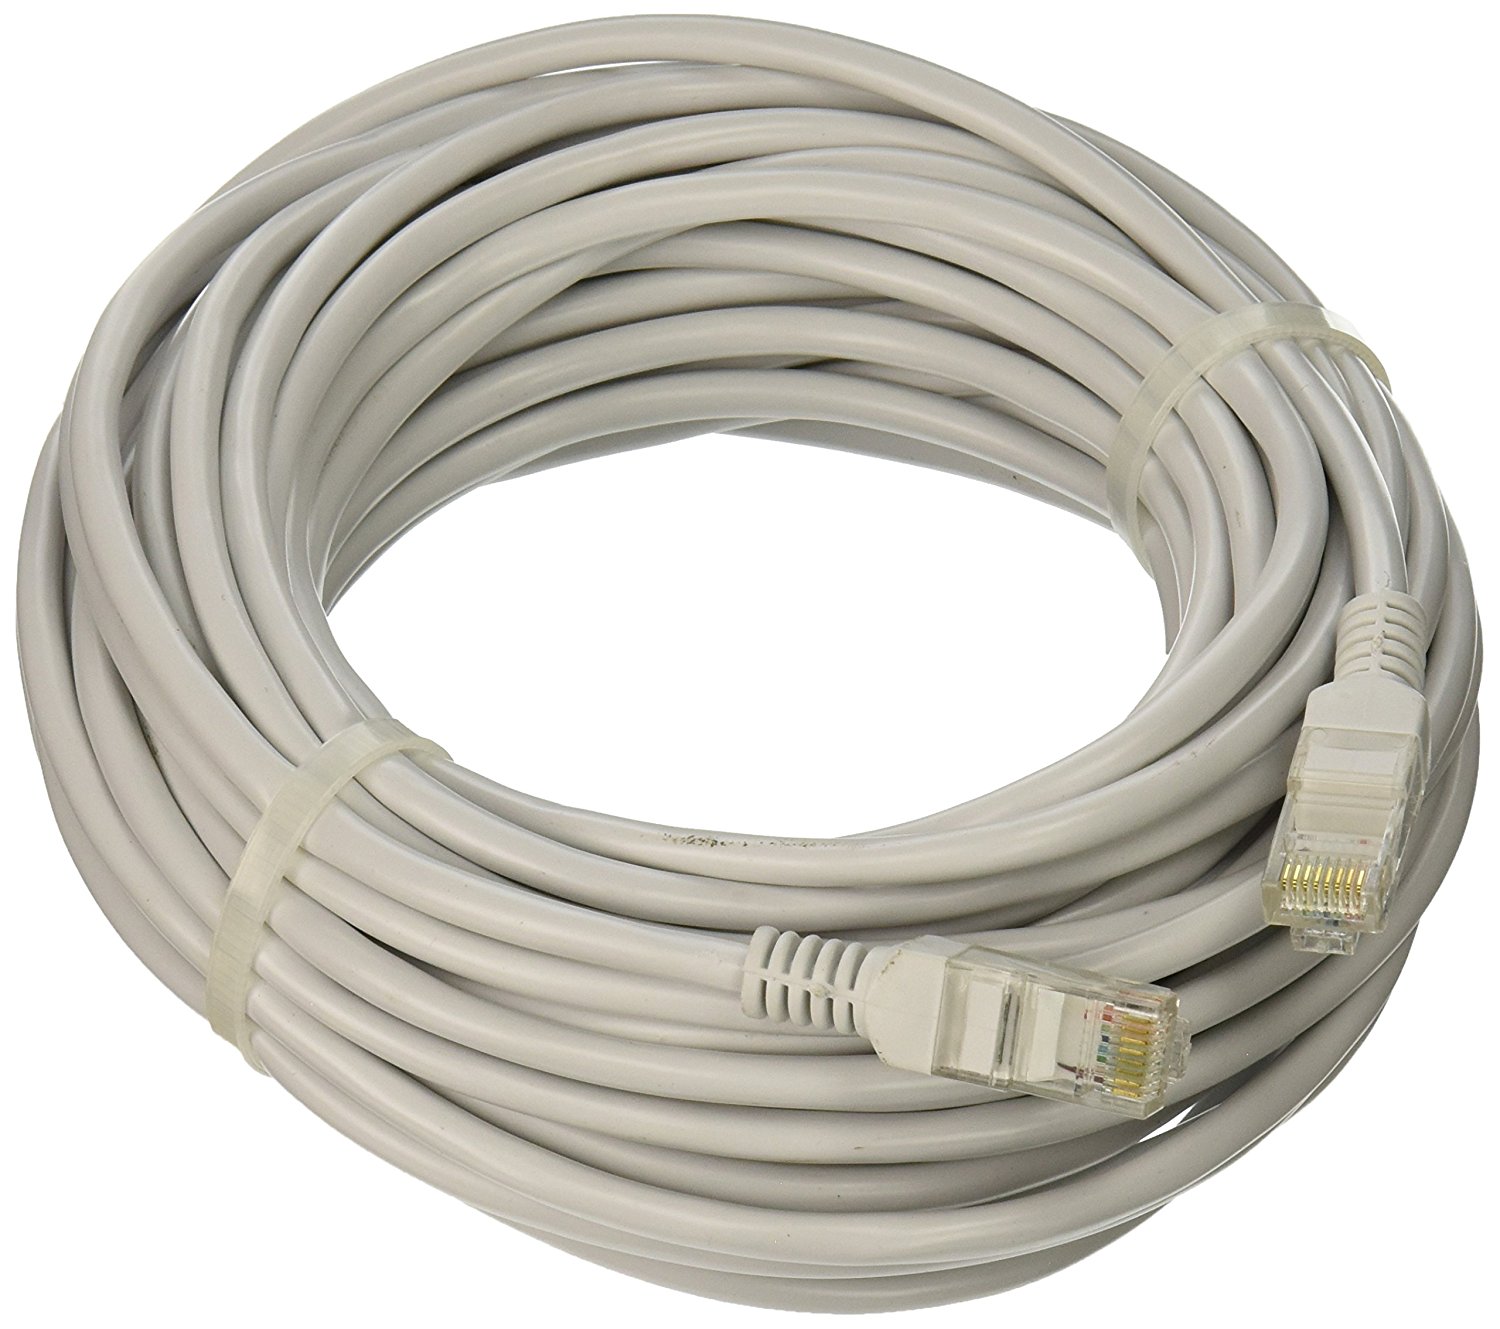 Importer520 Gray 25FT CAT5 CAT5e RJ45 PATCH ETHERNET NETWORK CABLE 25 FT For PC, Mac, Laptop, PS2, PS3, XBox, and XBox 360 - image 1 of 2